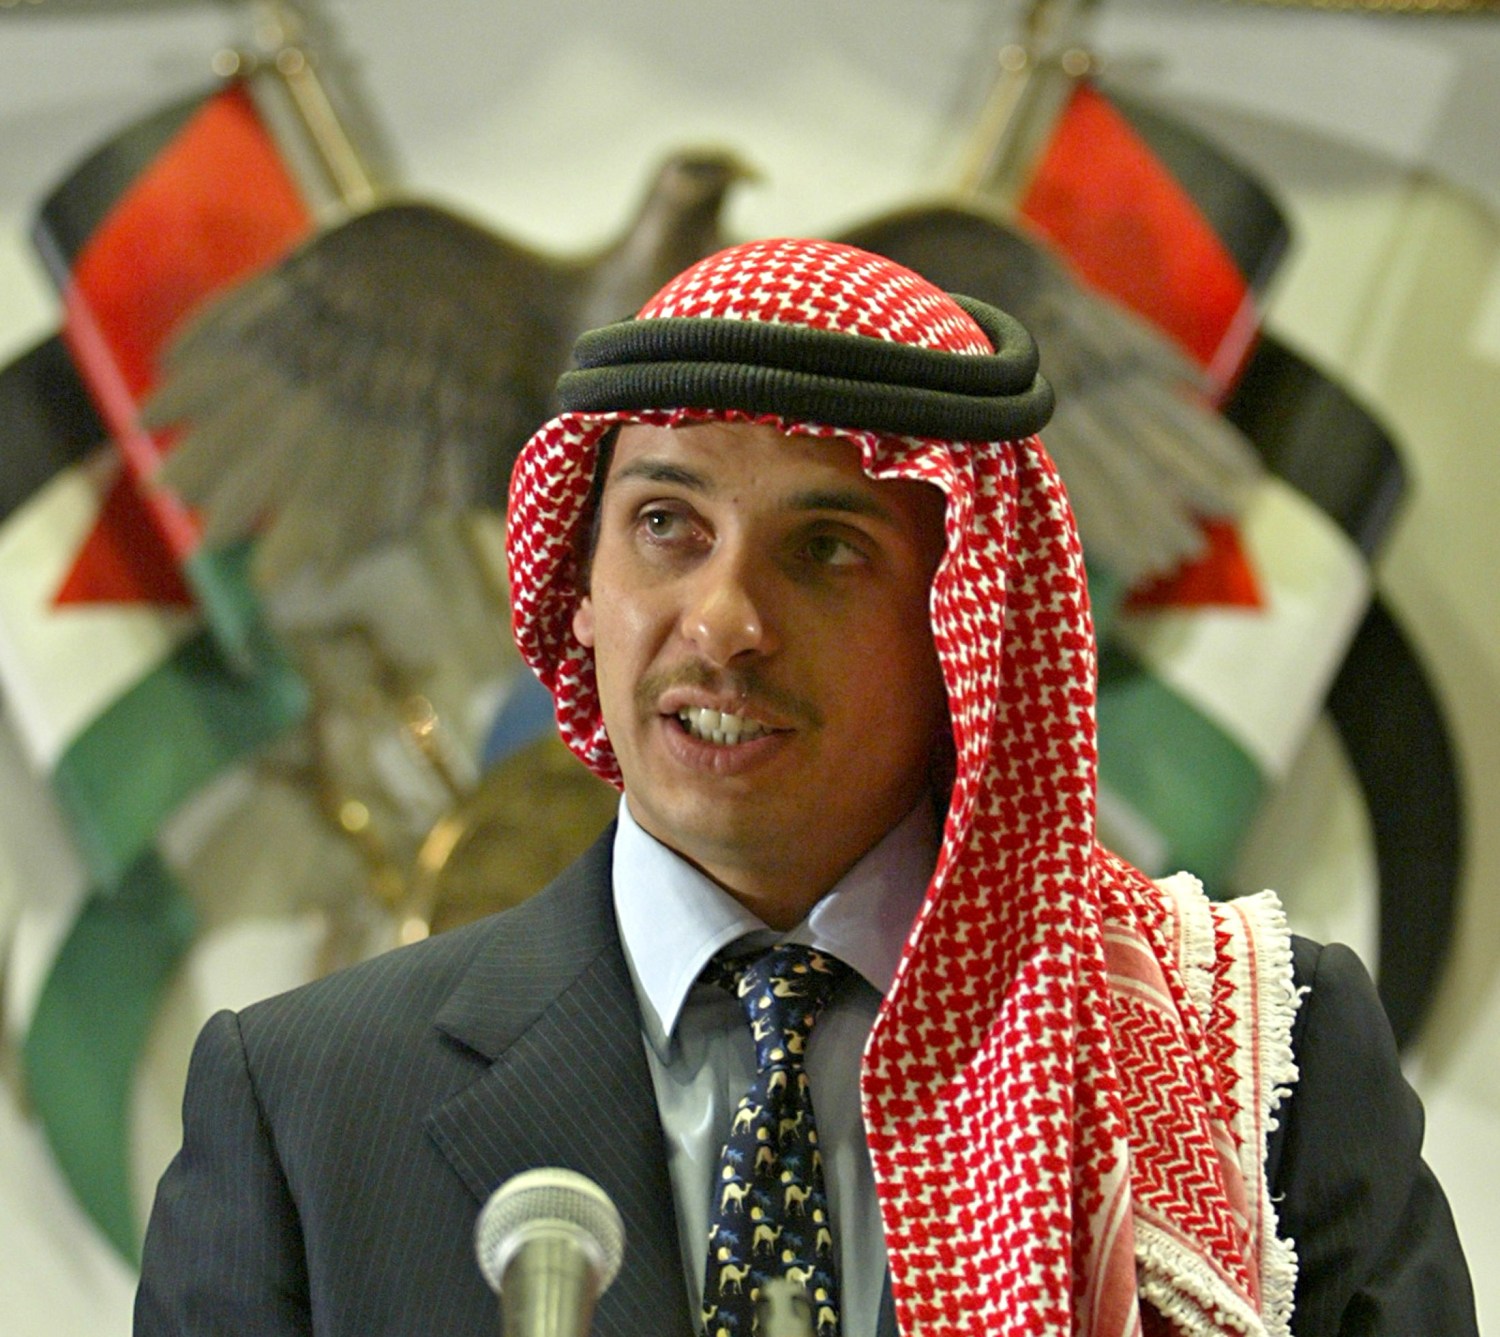 FILE PHOTO: Jordan's Crown Prince Hamza bin Hussein delivers a speech to Muslim clerics and scholars at the opening ceremony of a religious conference at the Islamic Al al-Bayet University in Amman, Jordan August 21, 2004. REUTERS/Ali Jarekji/File Photo